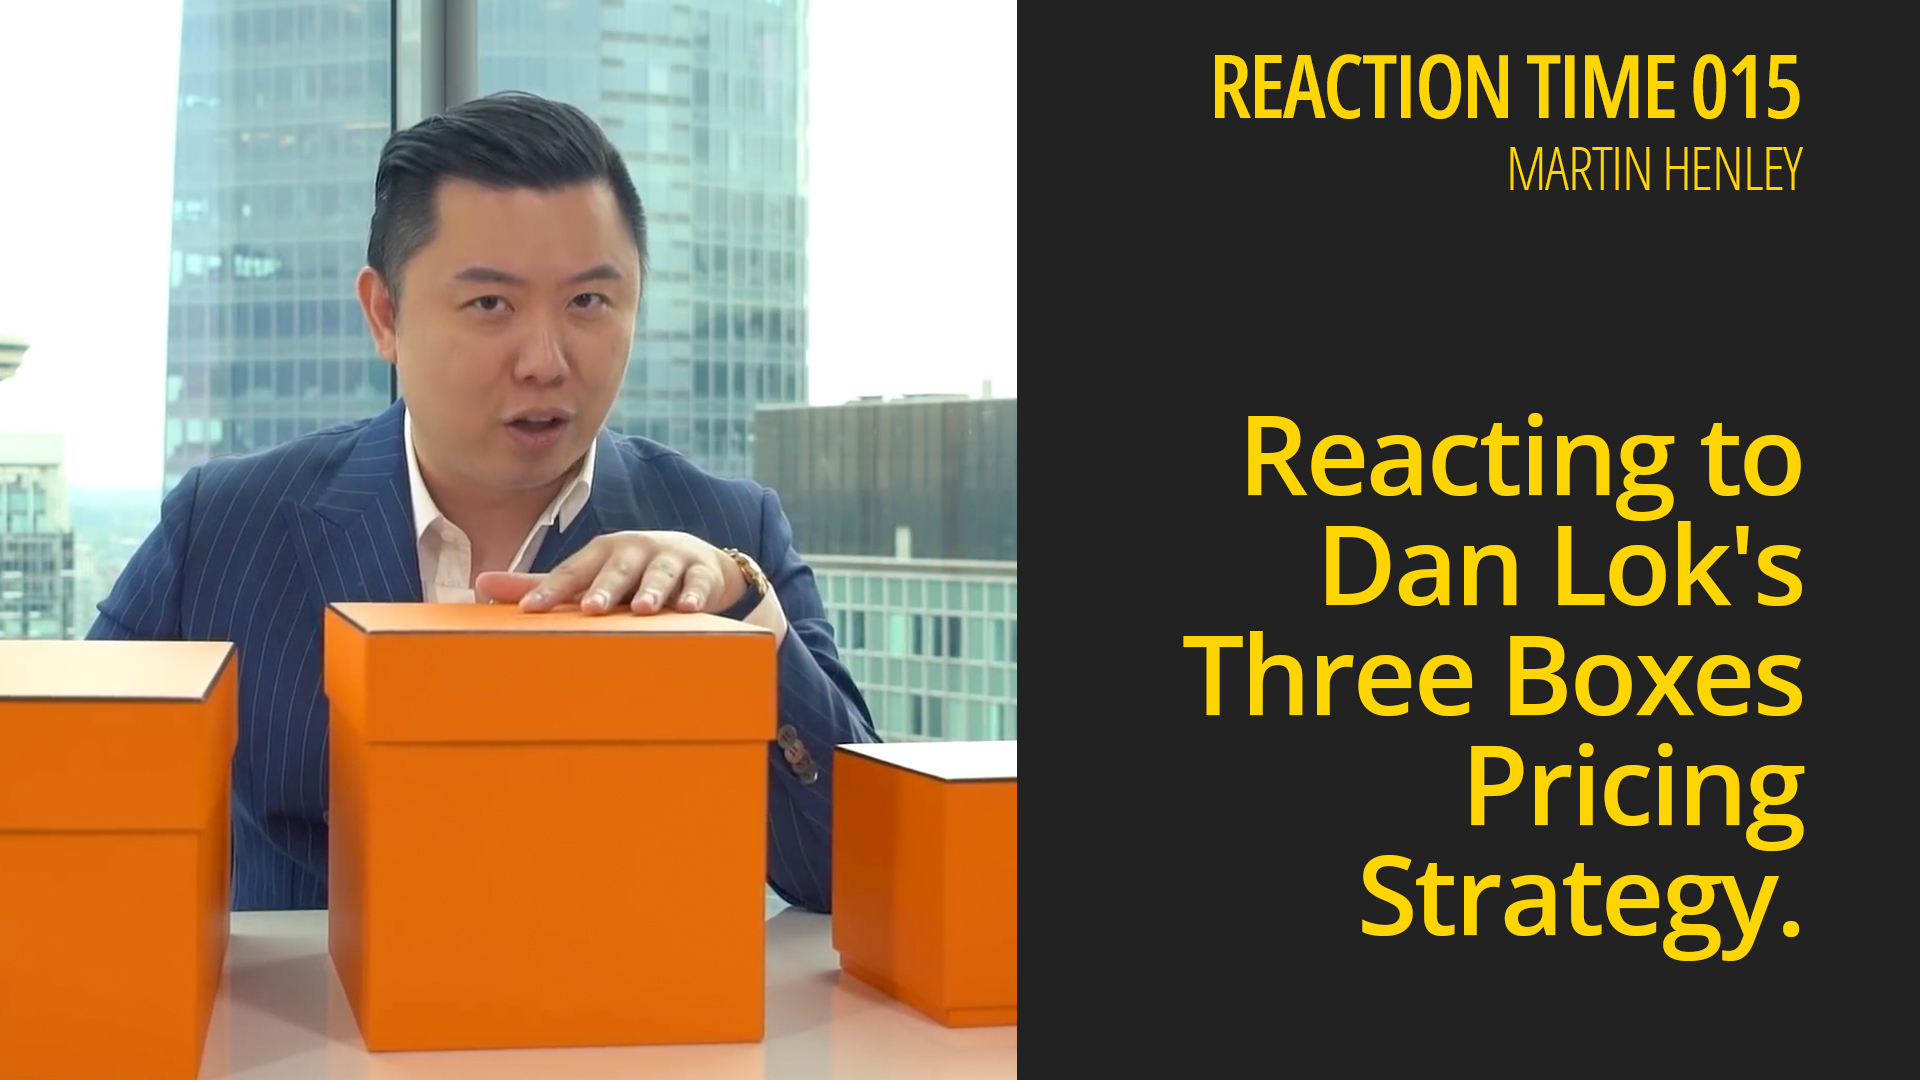 Reacting to Dan Lok’s Three Boxes Pricing Strategy – Reaction Time 015